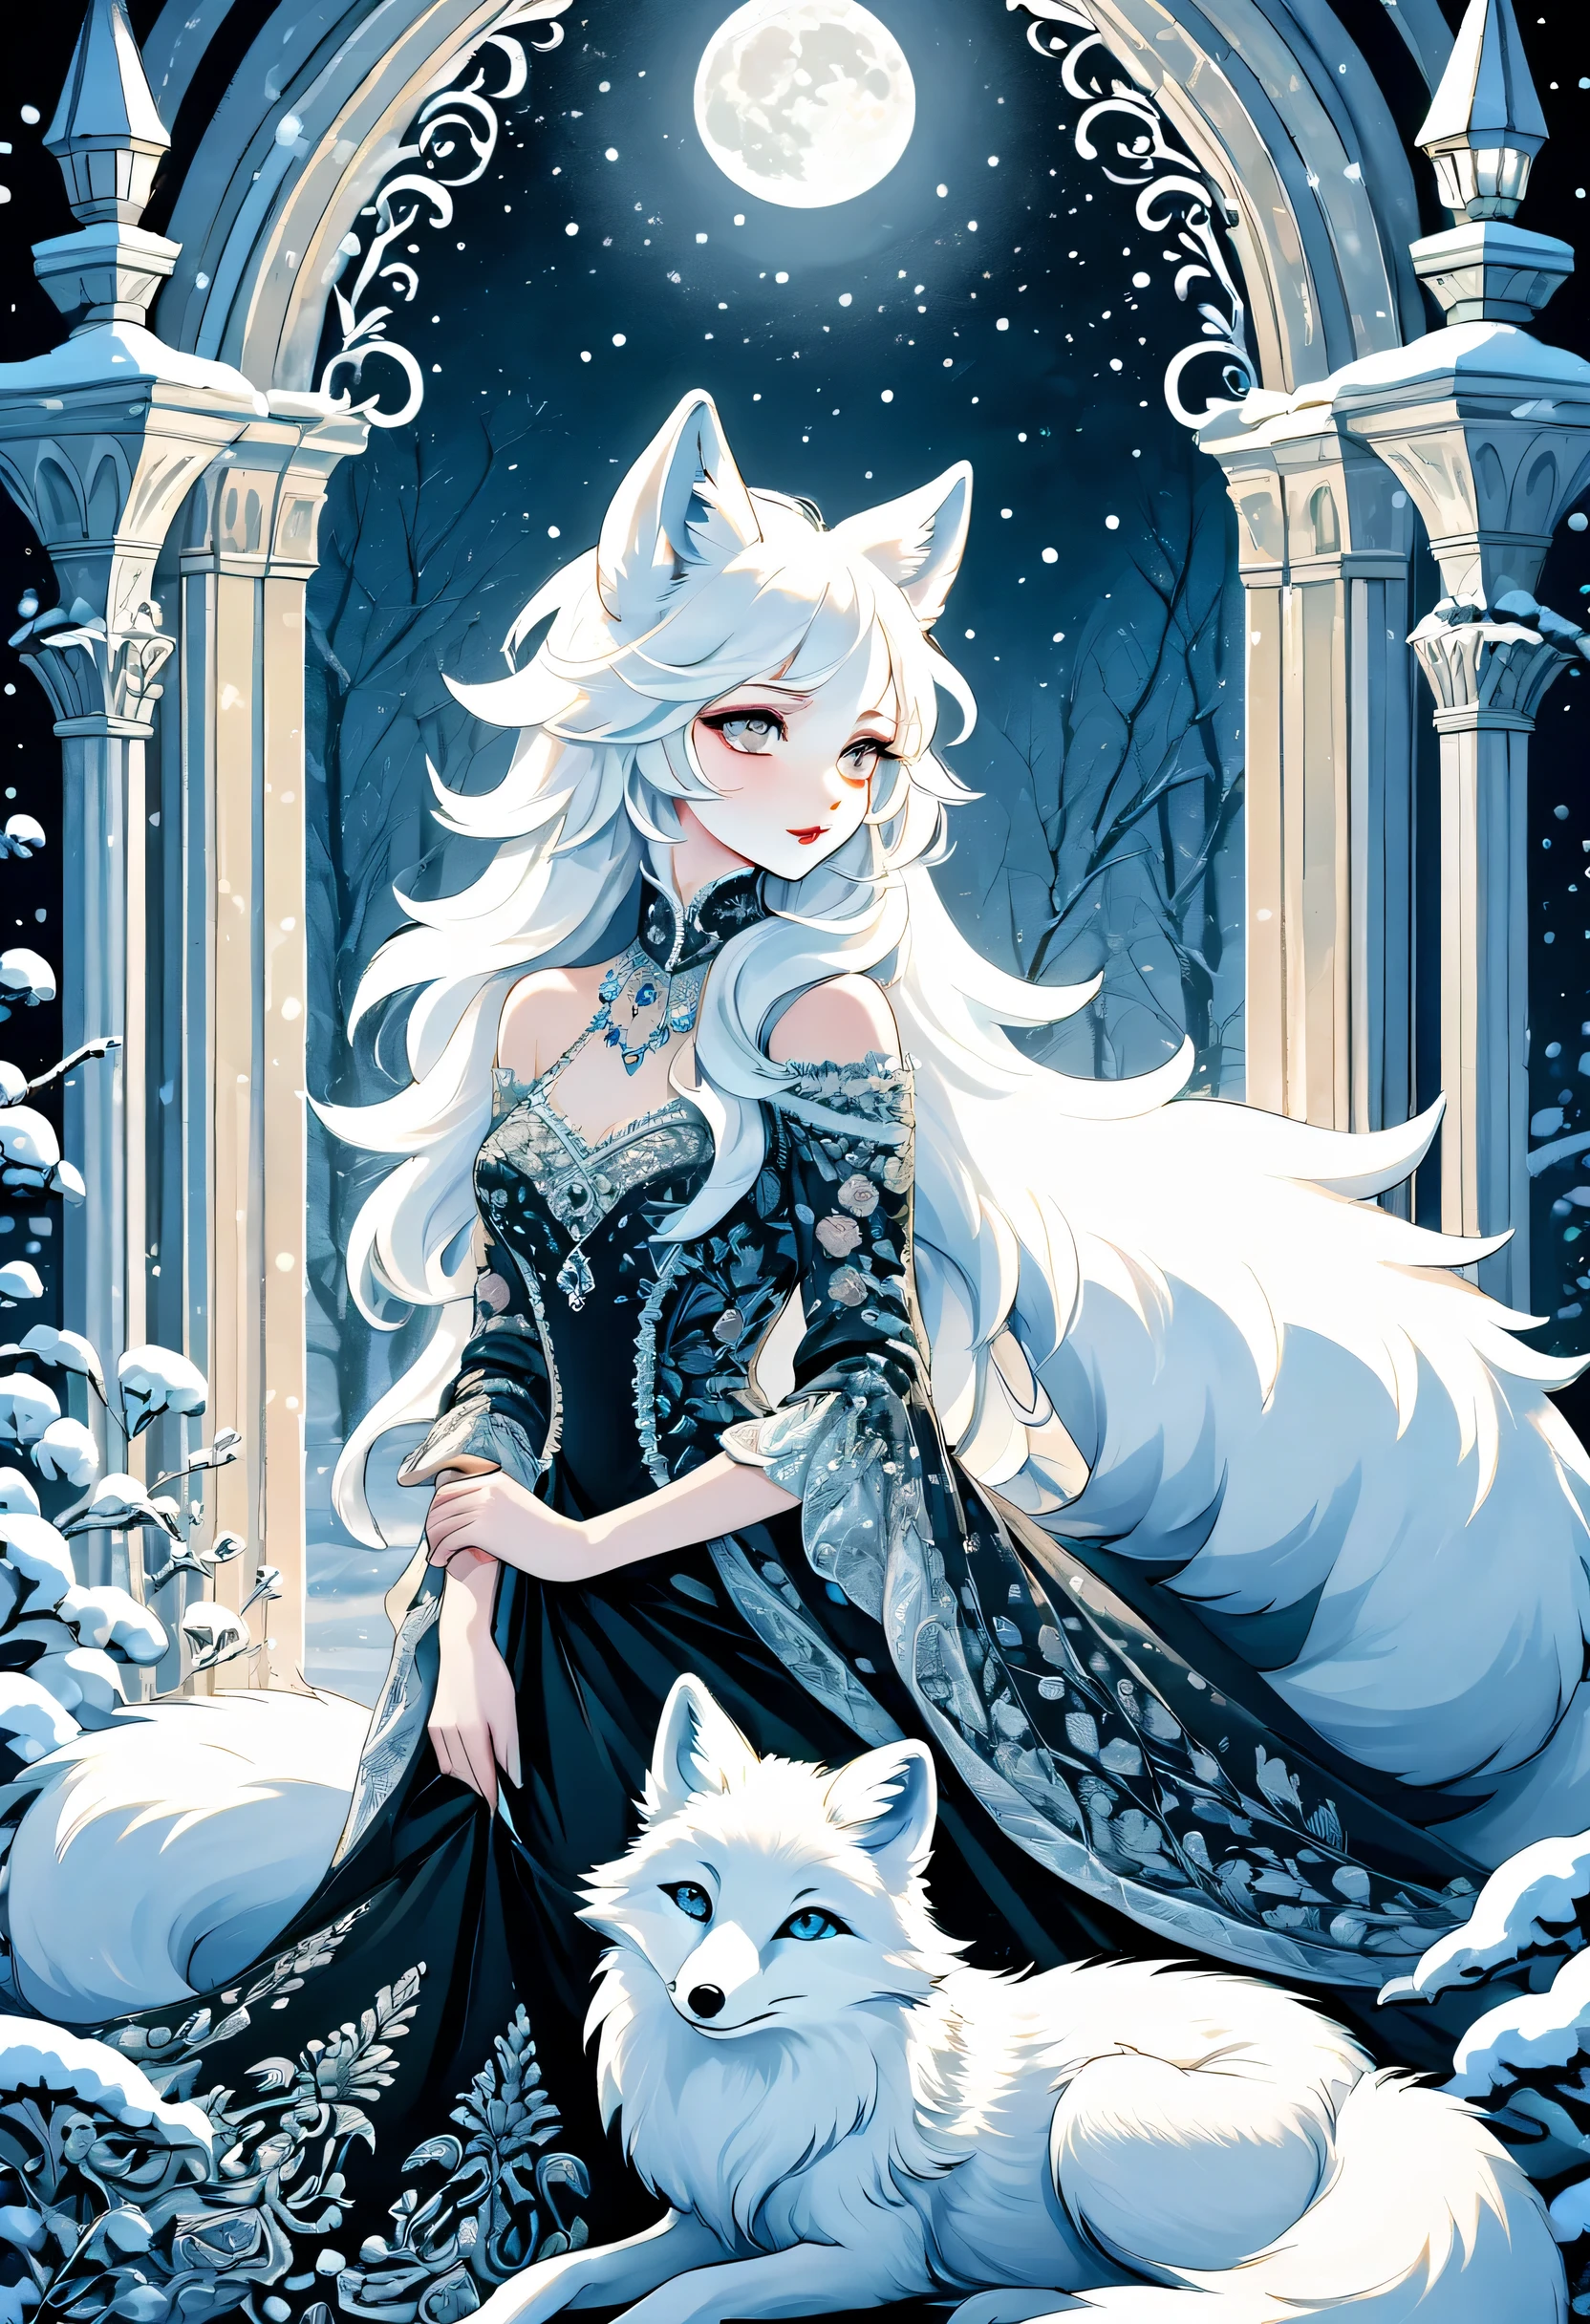 Arctic fox aesthetic illustration oil painting, mysterious atmosphere, Elegant atmosphere and intricate details, dim moonlight, Elegant feminine atmosphere with delicately patterned fur fox, A scolding gaze, looking from the side, Delicate beauty with highlights, Glamorous swirls and delicate lace snow, in beautiful gothic architecture, Fancy effects and background decorations, Shining white on the fur, fantastic shine, luxurious interior, grunge painted gouache, tonal contrast, highly detailed fox, High quality brushwork, 最high quality, Cinematic angle and light, Gothic Beauty, Super detailed and insane illustrations, My elegant friend the wolf is next to me., Delicate and cute wishes were emphasized, A beautiful  snow flower, Beautiful detailed glow texture, grunge painted gouache, high contrast, highly detailed gothic, high quality, 最high quality, Cinematic angle and light,